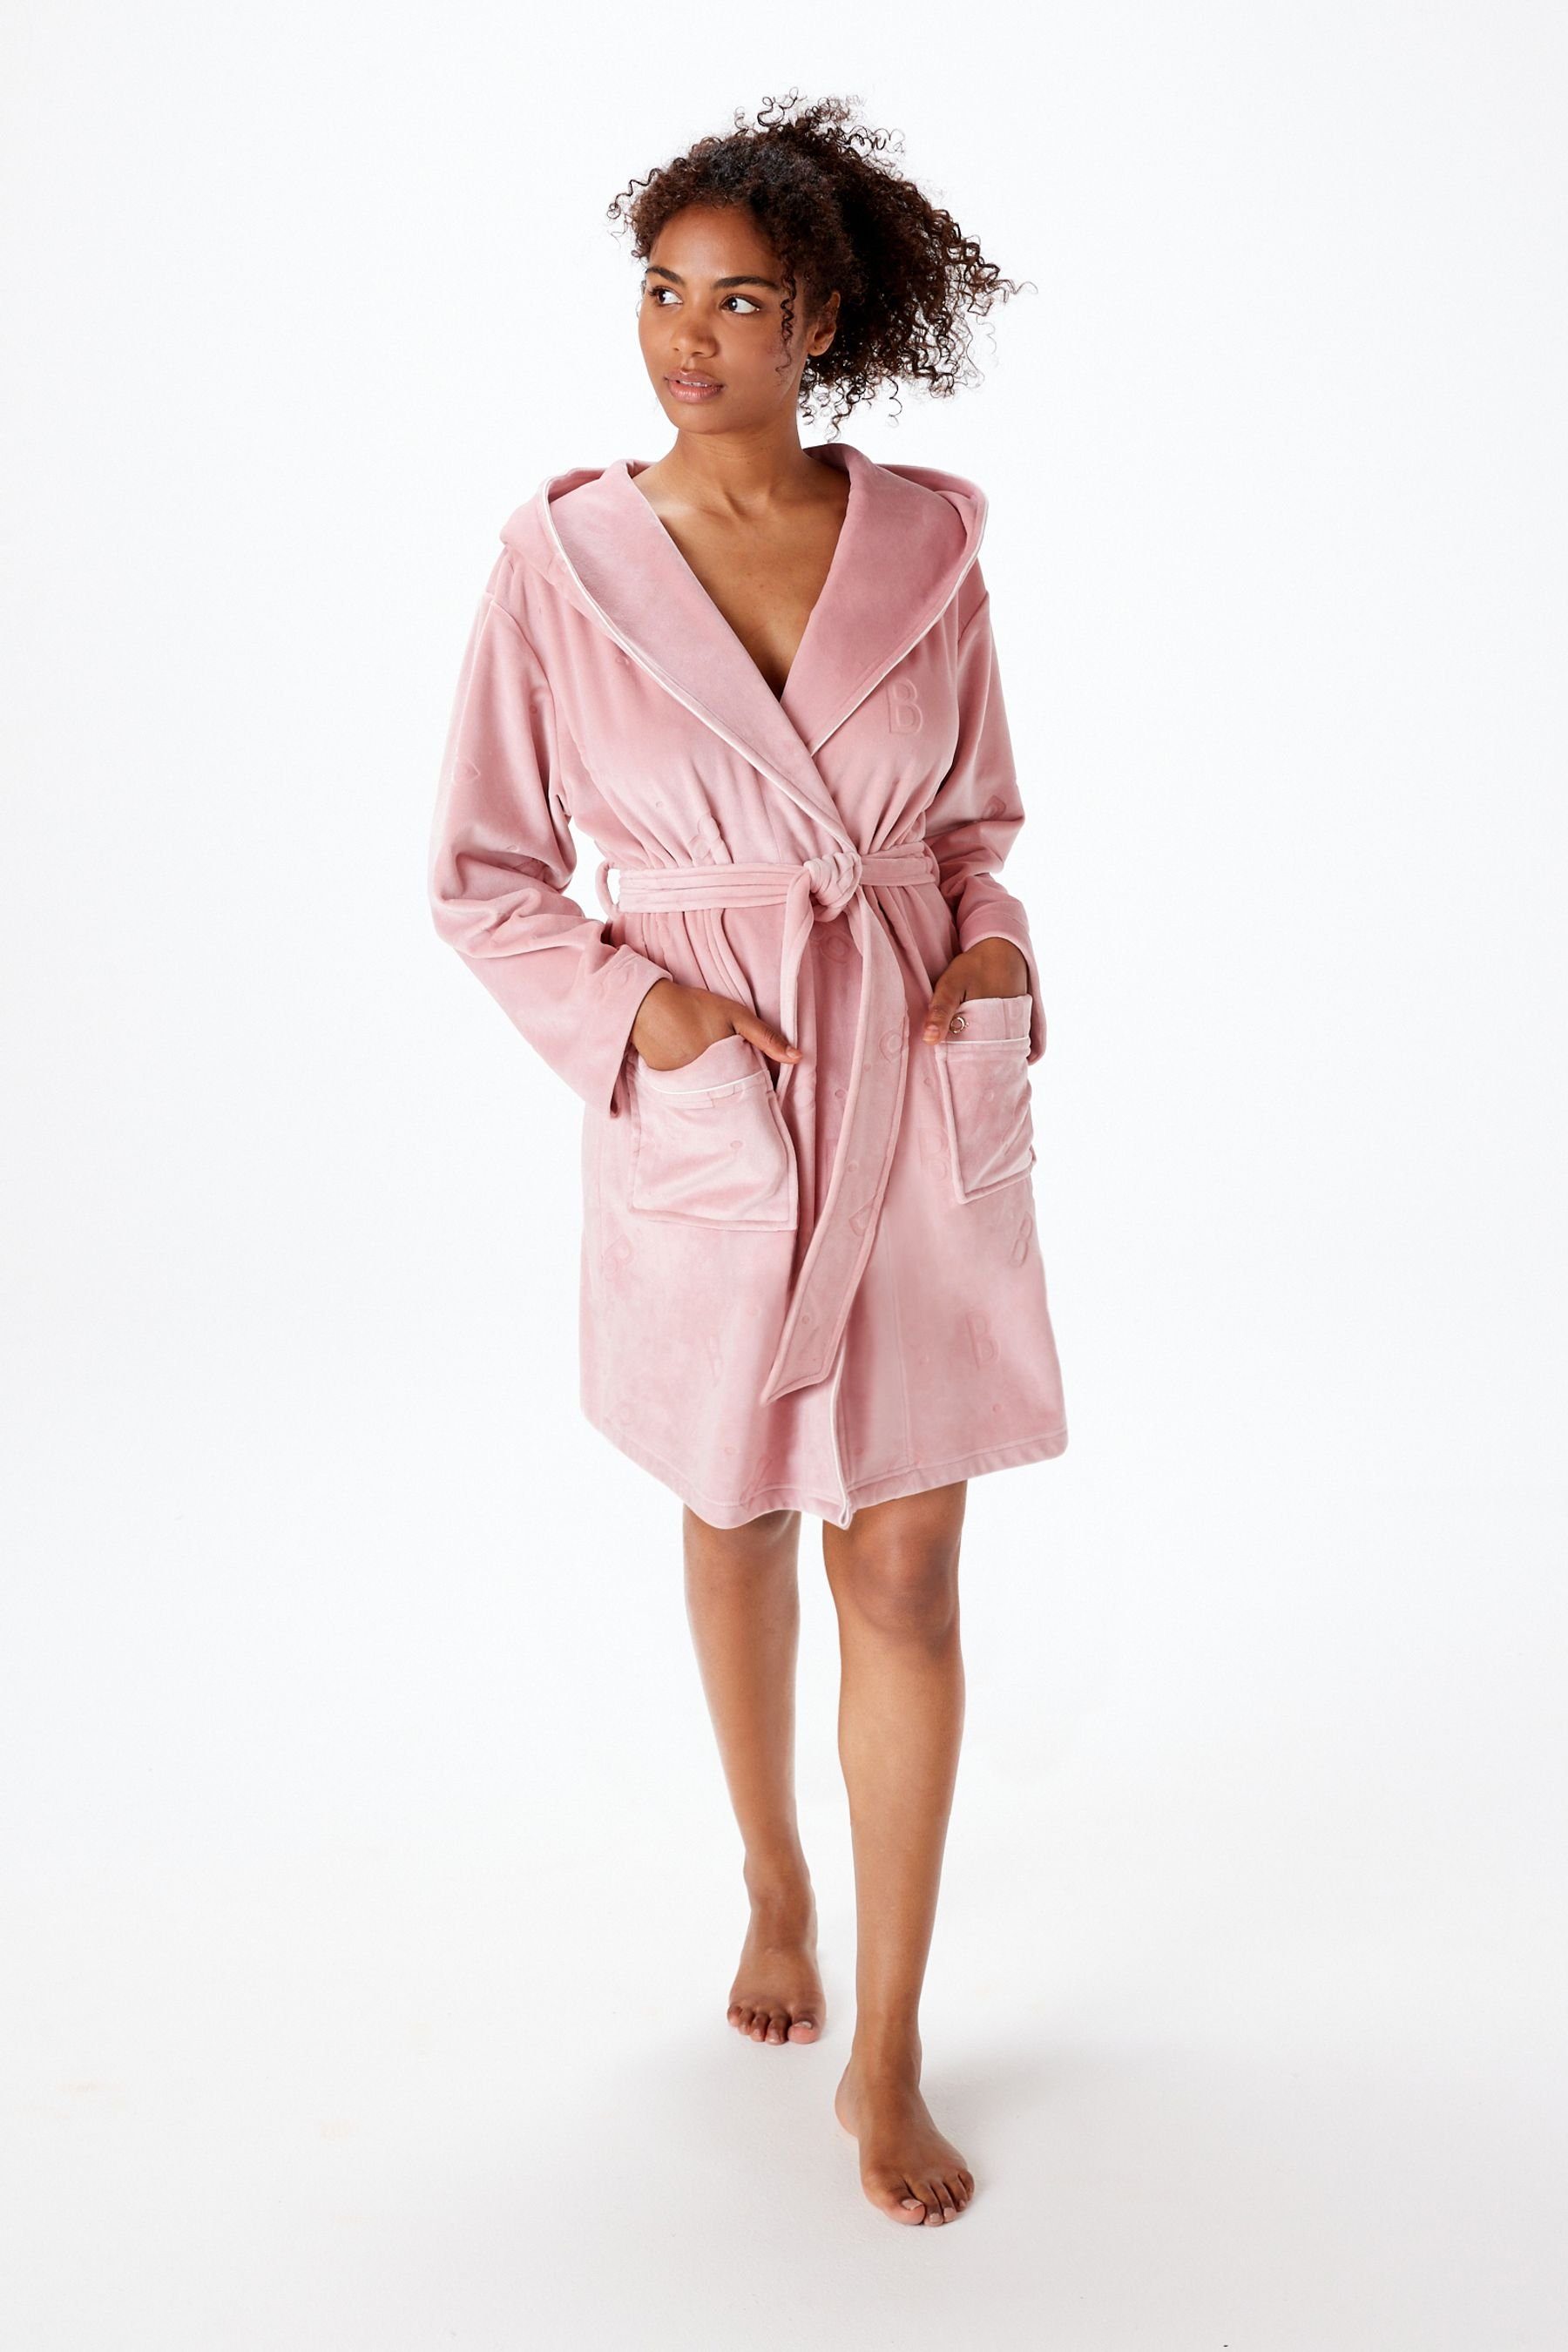 B by Ted Baker Damenbademantel Baker Polyester, Pink Bademantel, Kuscheliger Elasthan Ted by B